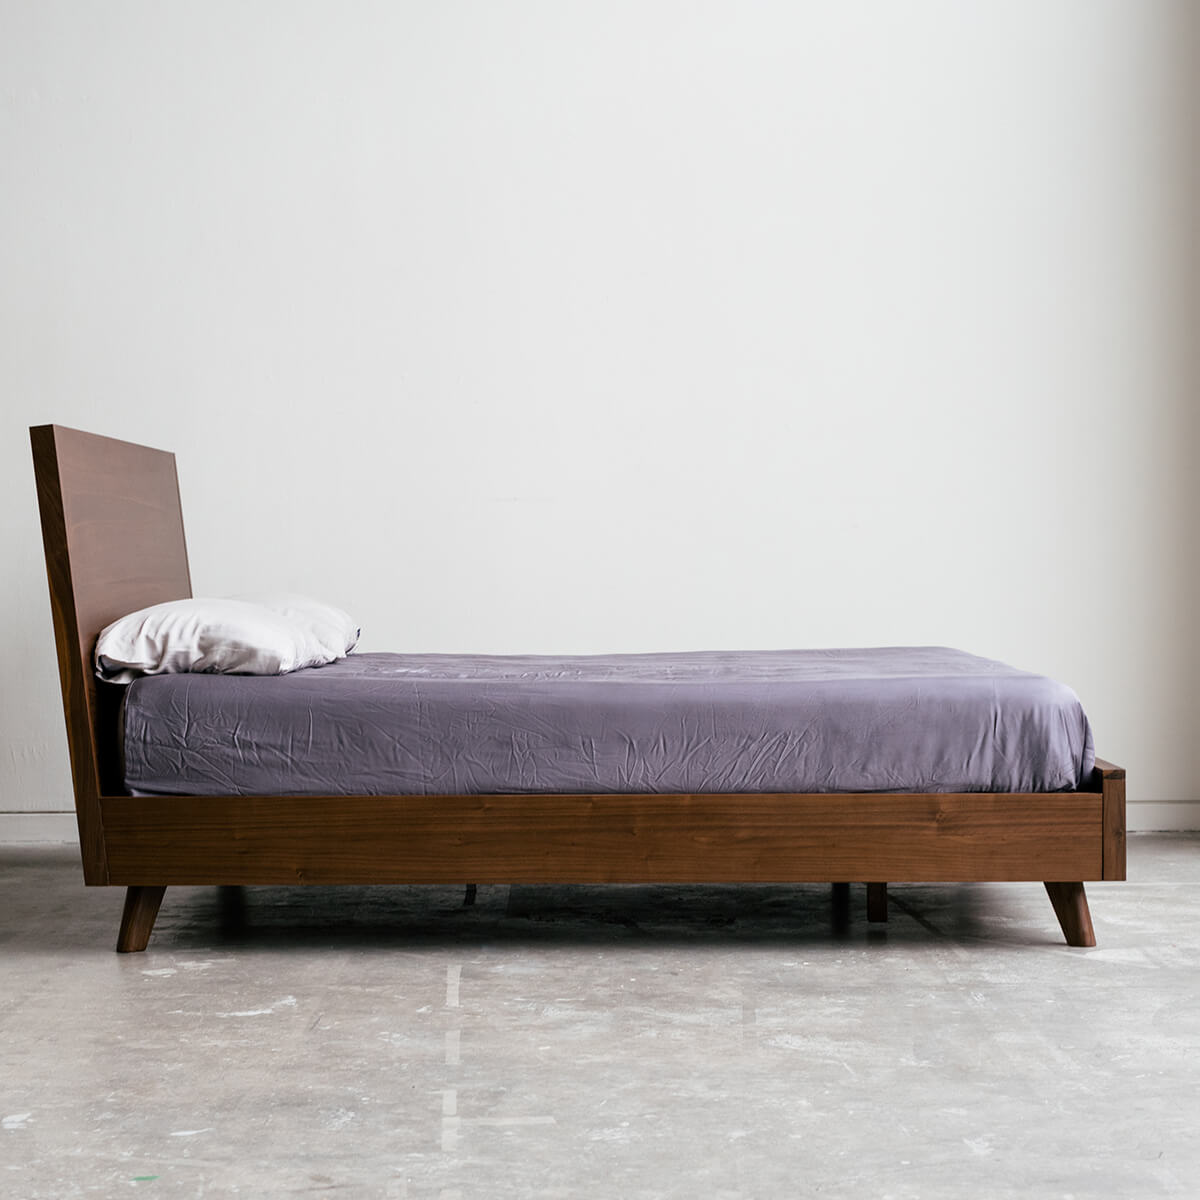 Mim Concept  best Modern furniture stores in Toronto, Ottawa and Mississauga to sell modern contemporary bedroom furniture and condo furniture. Minimal mid century modern bed Low profile platform storage bed solid walnut wood modern organic